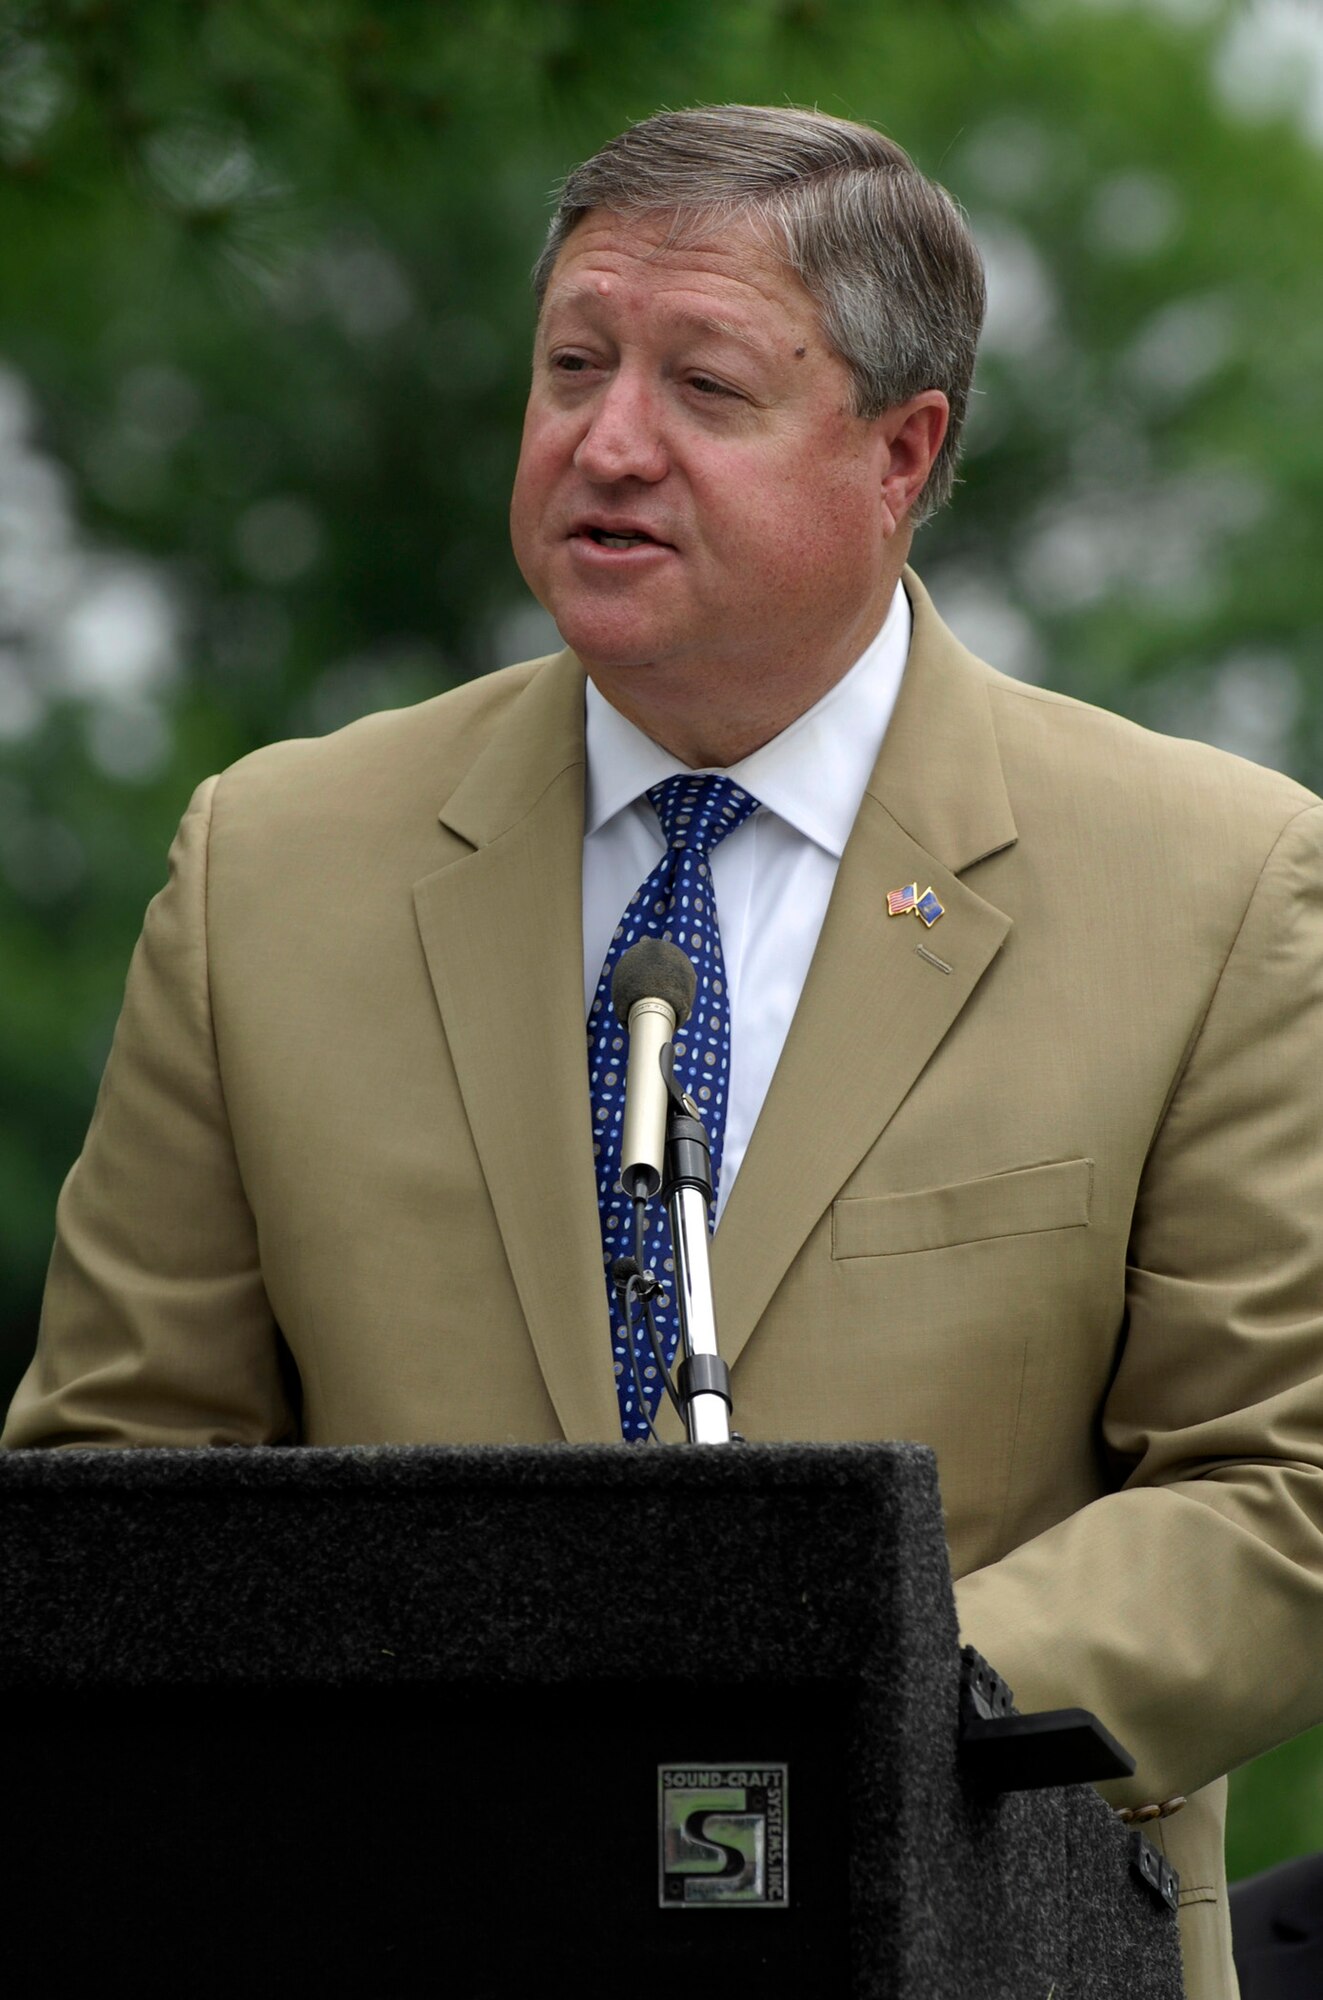 Secretary of the Air Force Michael Donley speaks at a remembrance ceremony, June 25, 2011, at Arlington National Cemetery, Va., to mark the 15th anniversary since the Khobar Towers bombing. Nineteen Airmen were killed in the terrorist bombing, June 25, 1996, at Dhahran Air Base, Saudi Arabia. (U.S. Air Force photo/Staff Sgt. Tiffany Trojca)